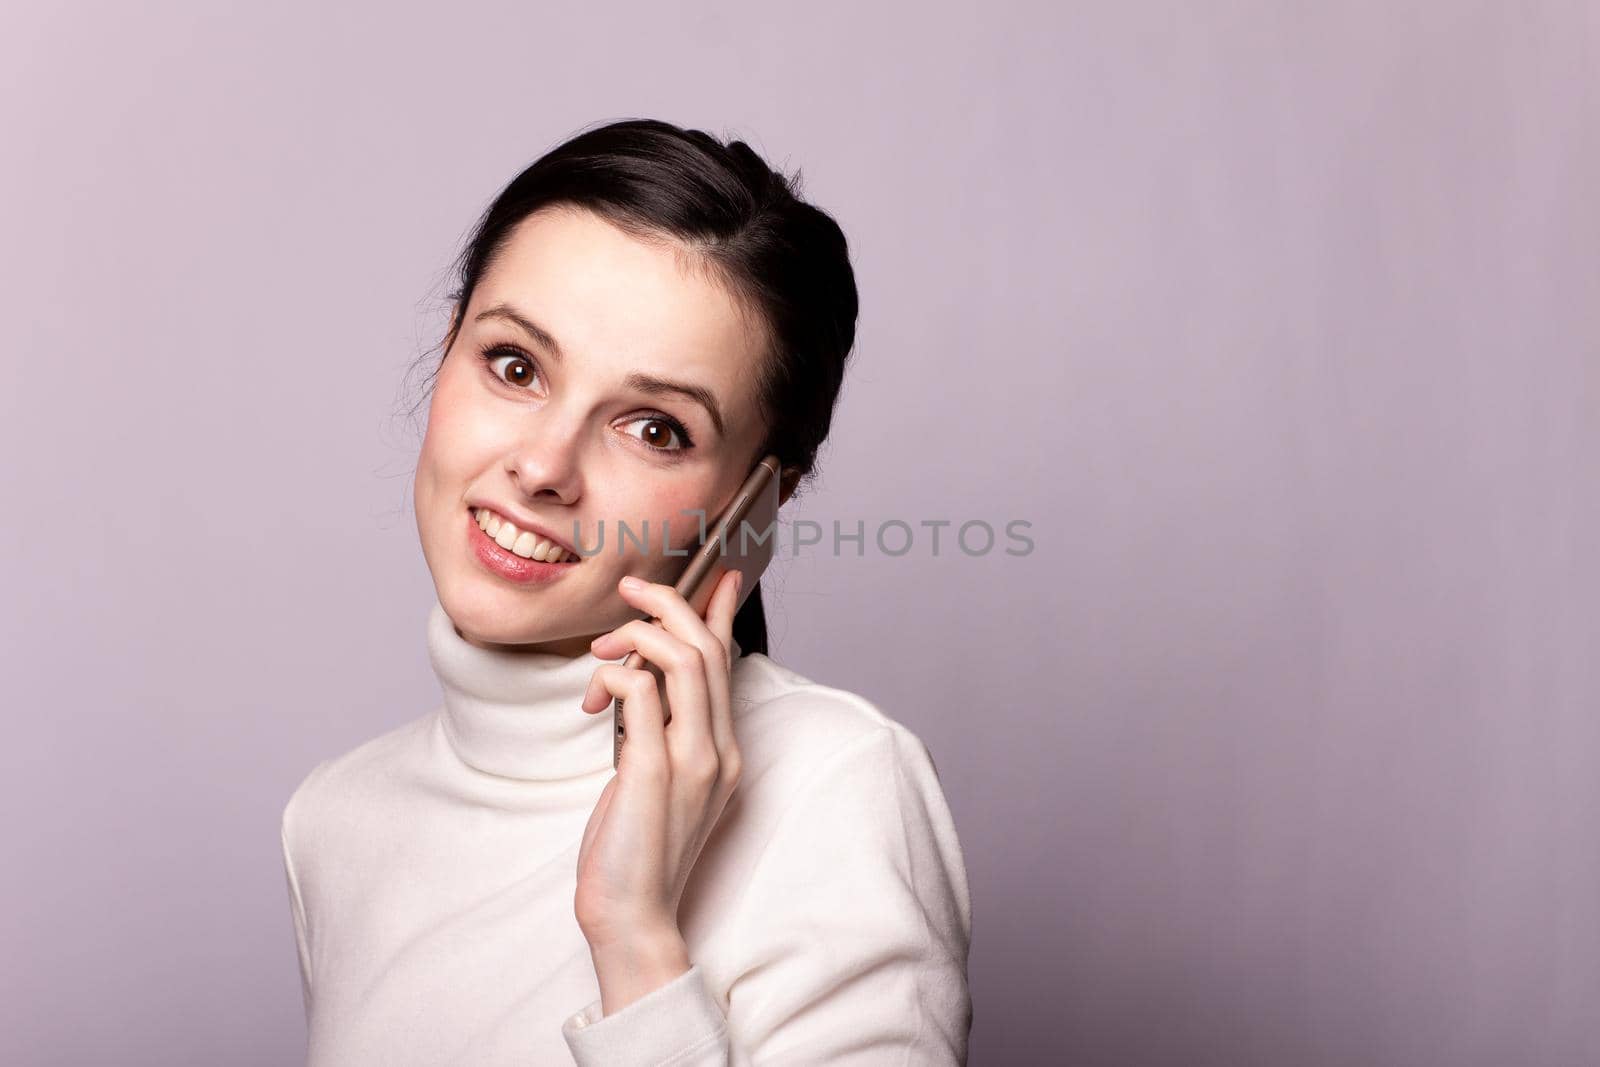 woman in a white turtleneck talking on the phone, portrait on a gray background by shilovskaya